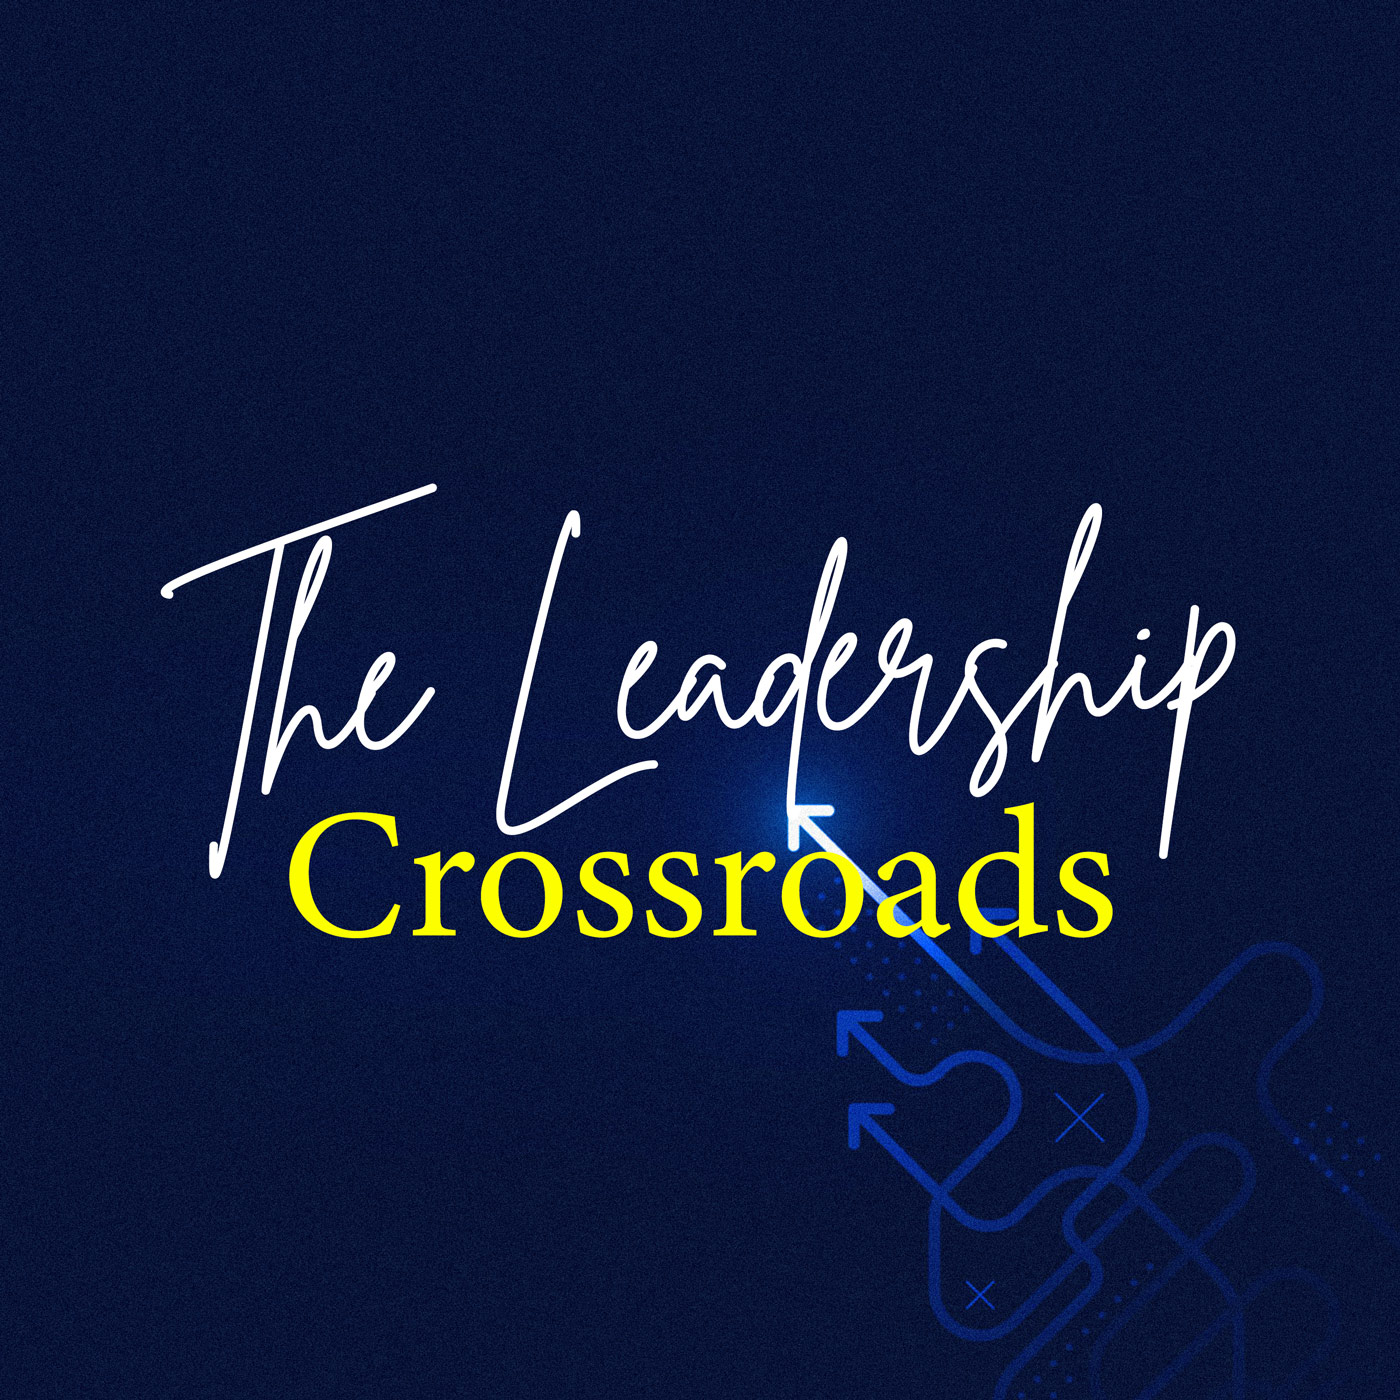 Welcome to Leadership Crossroads with Tim Hicks